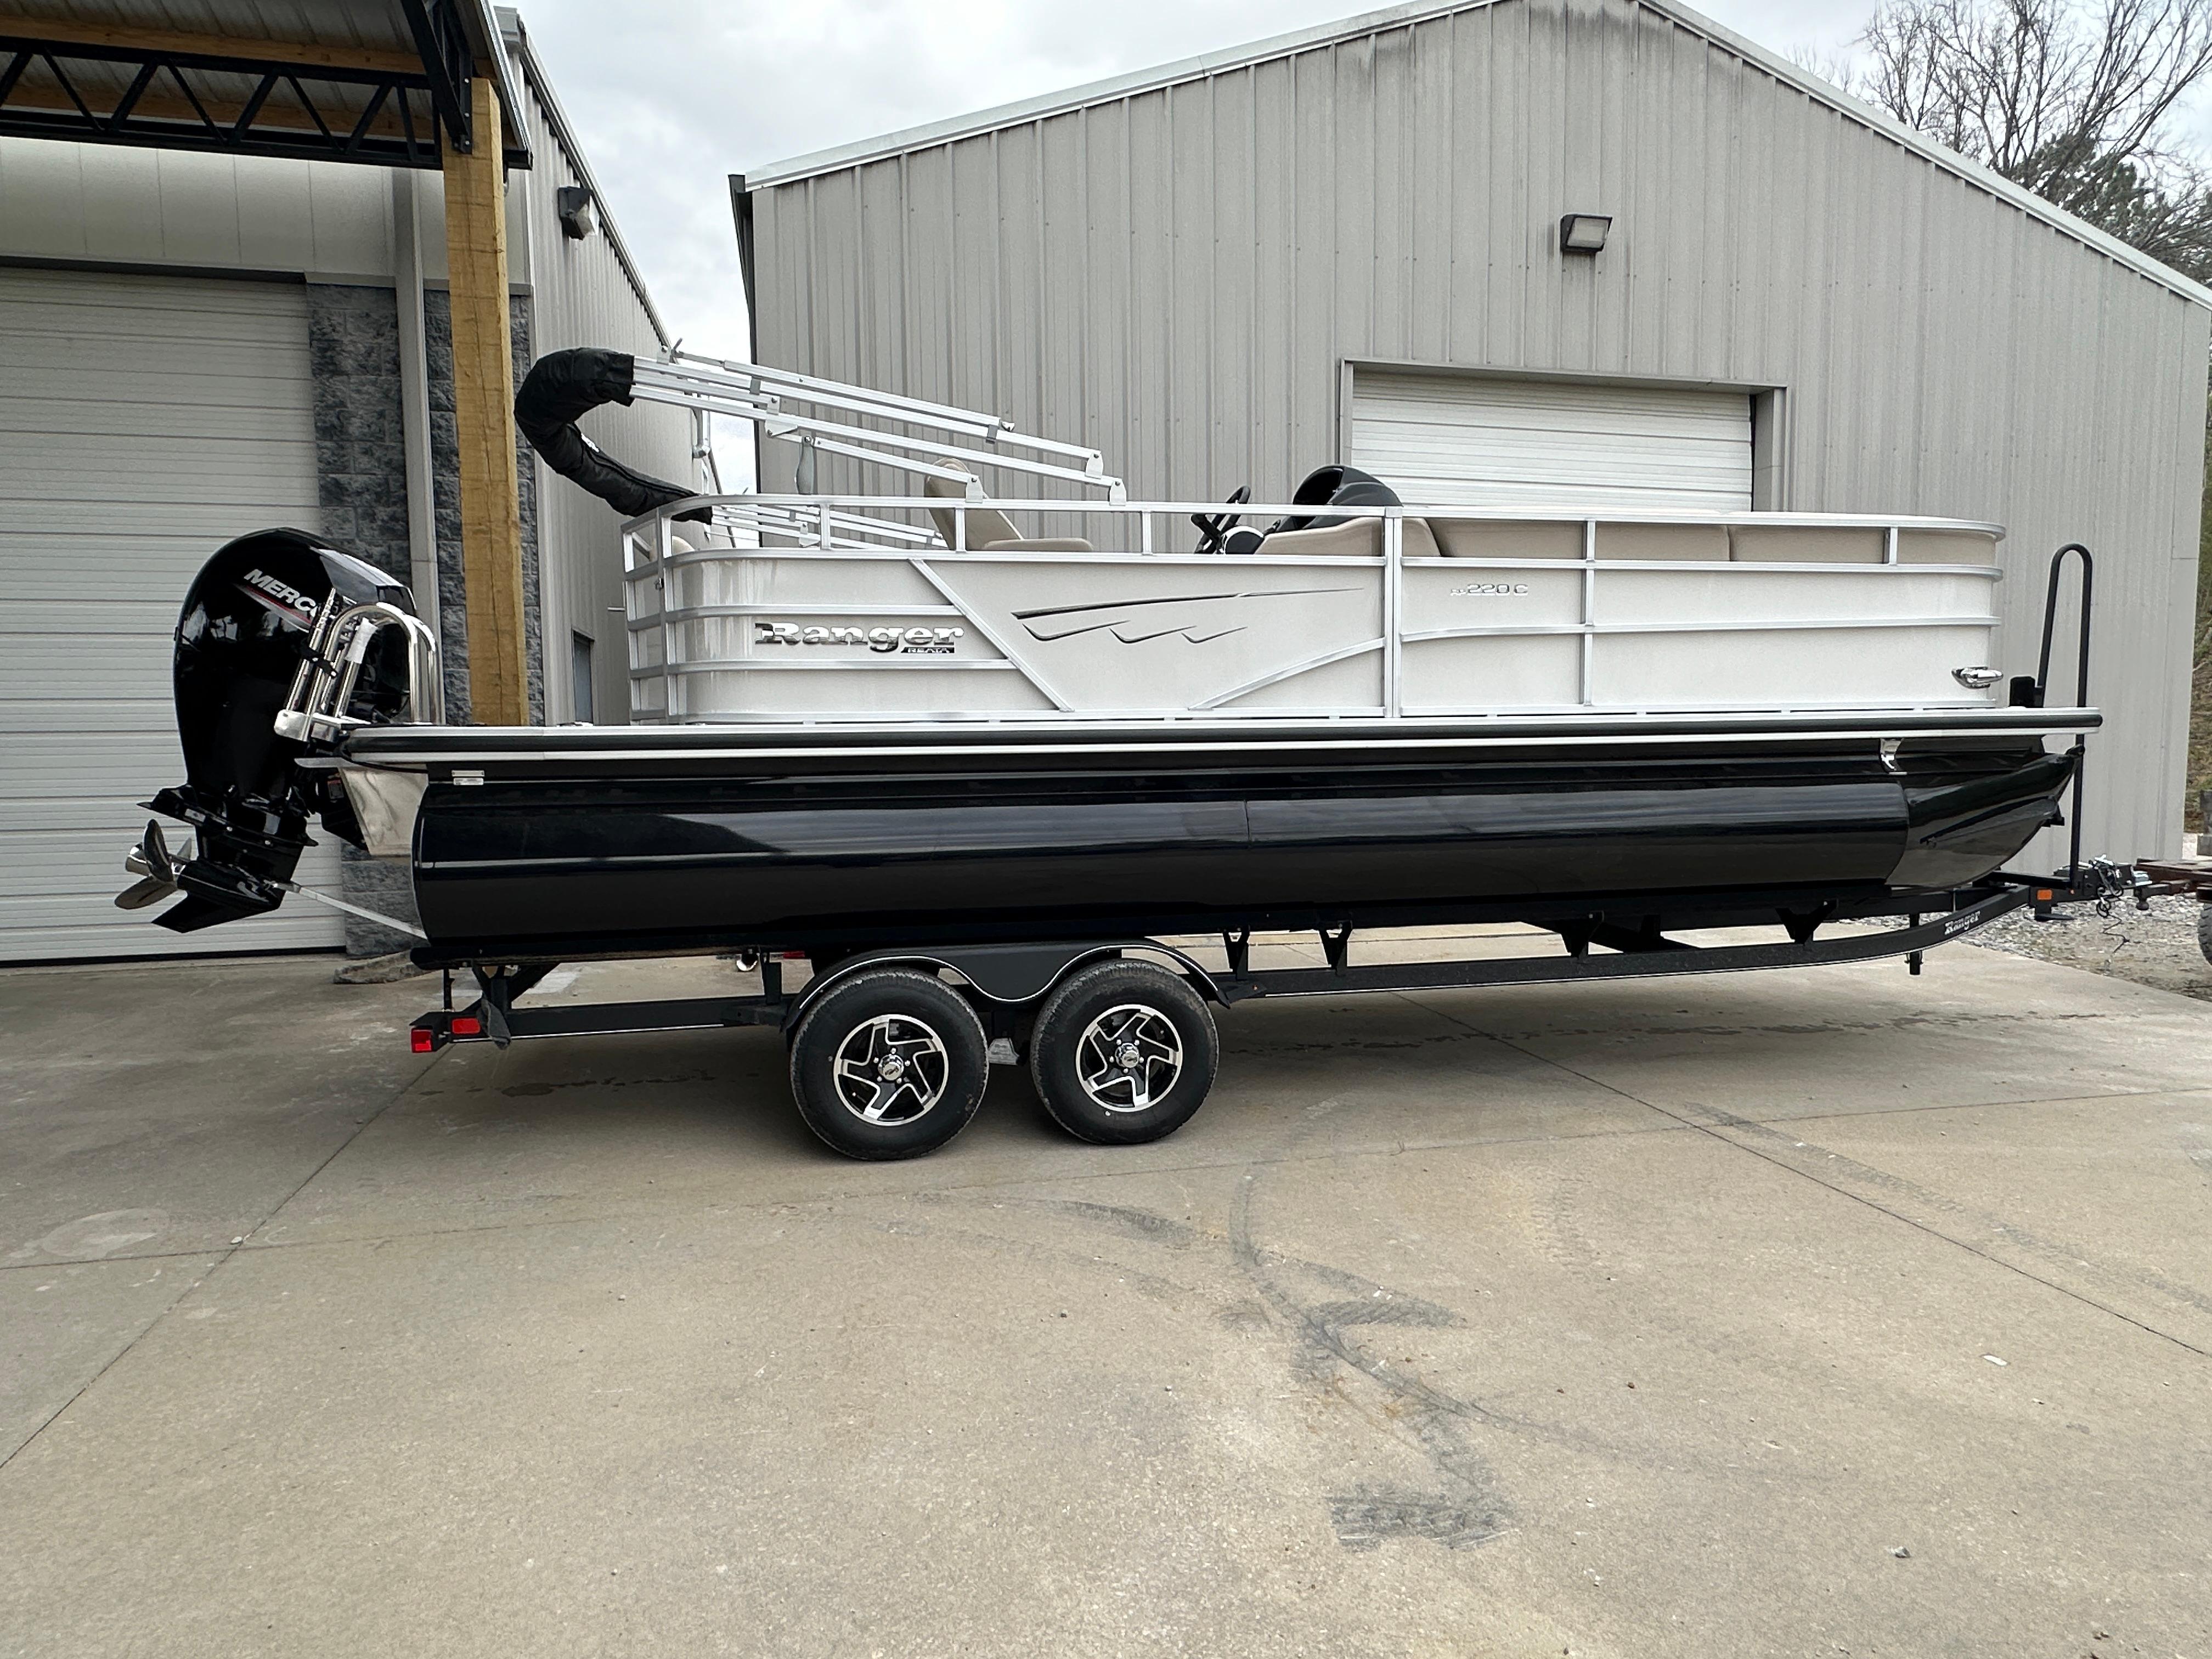 Boats for sale in Cookeville - Boat Trader